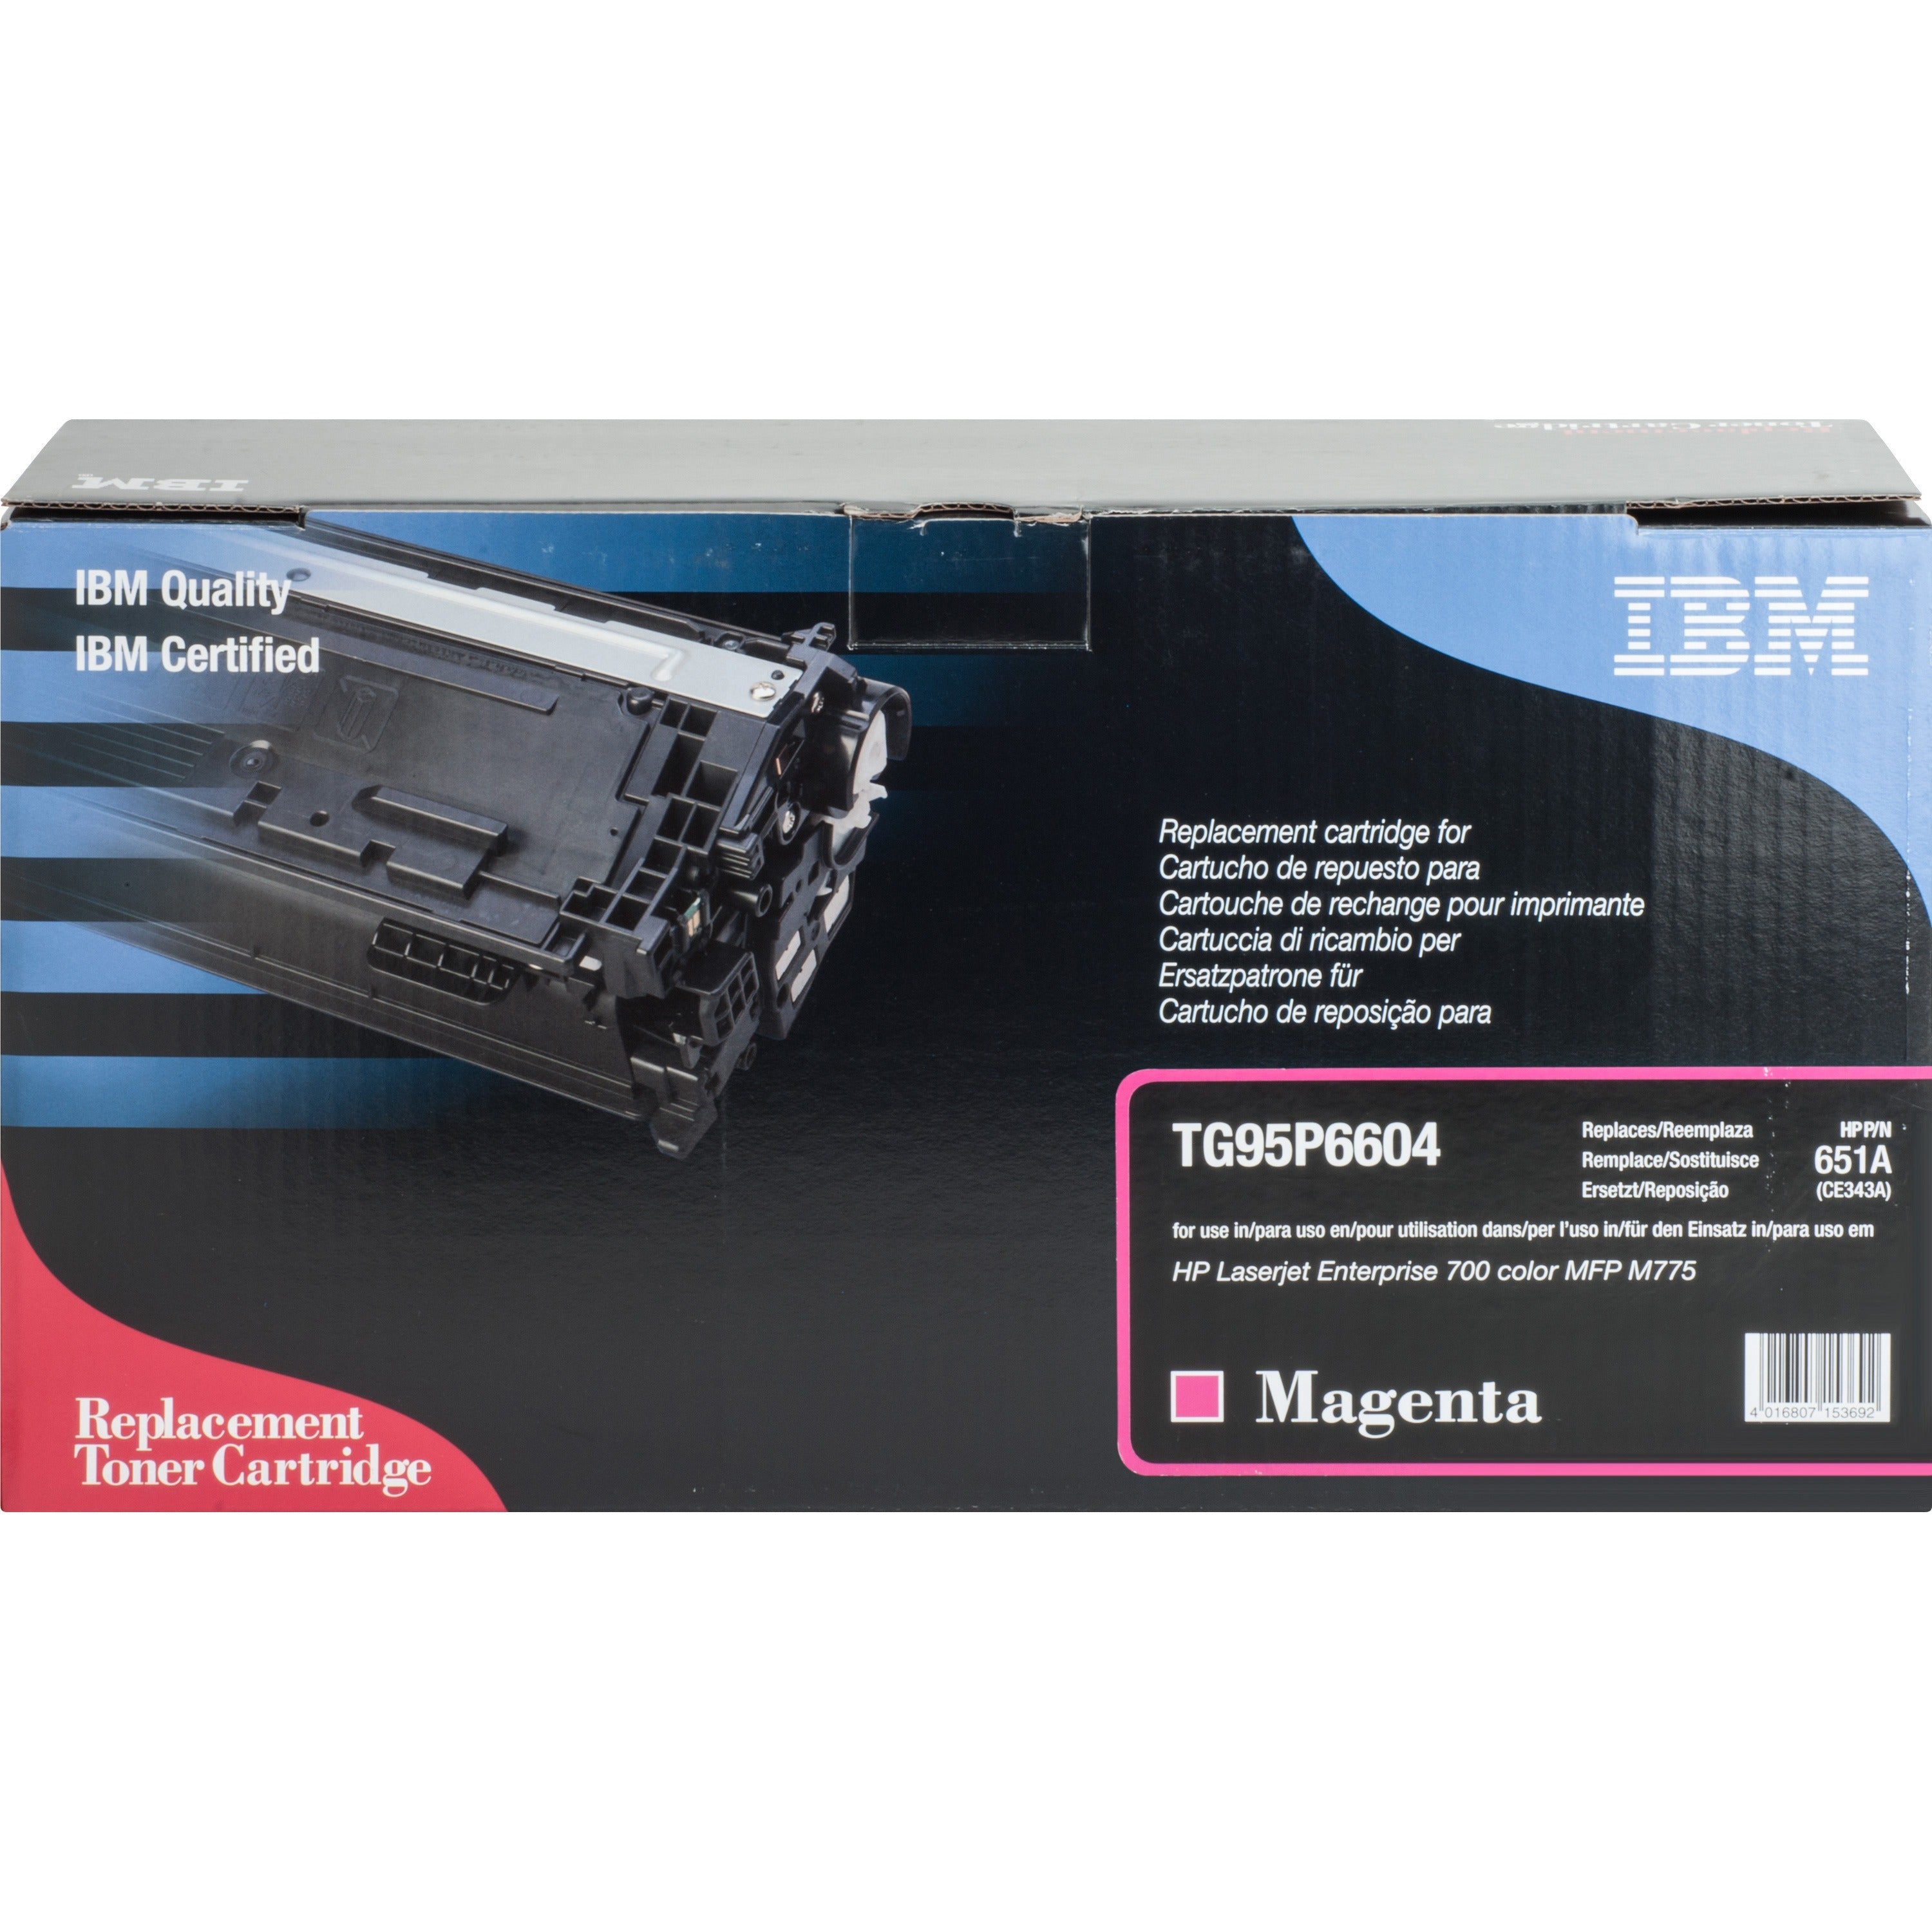 ibm-remanufactured-toner-cartridge-alternative-for-hp-651a-ce343a-laser-16000-pages-magenta-1-each_ibmtg95p6604 - 1